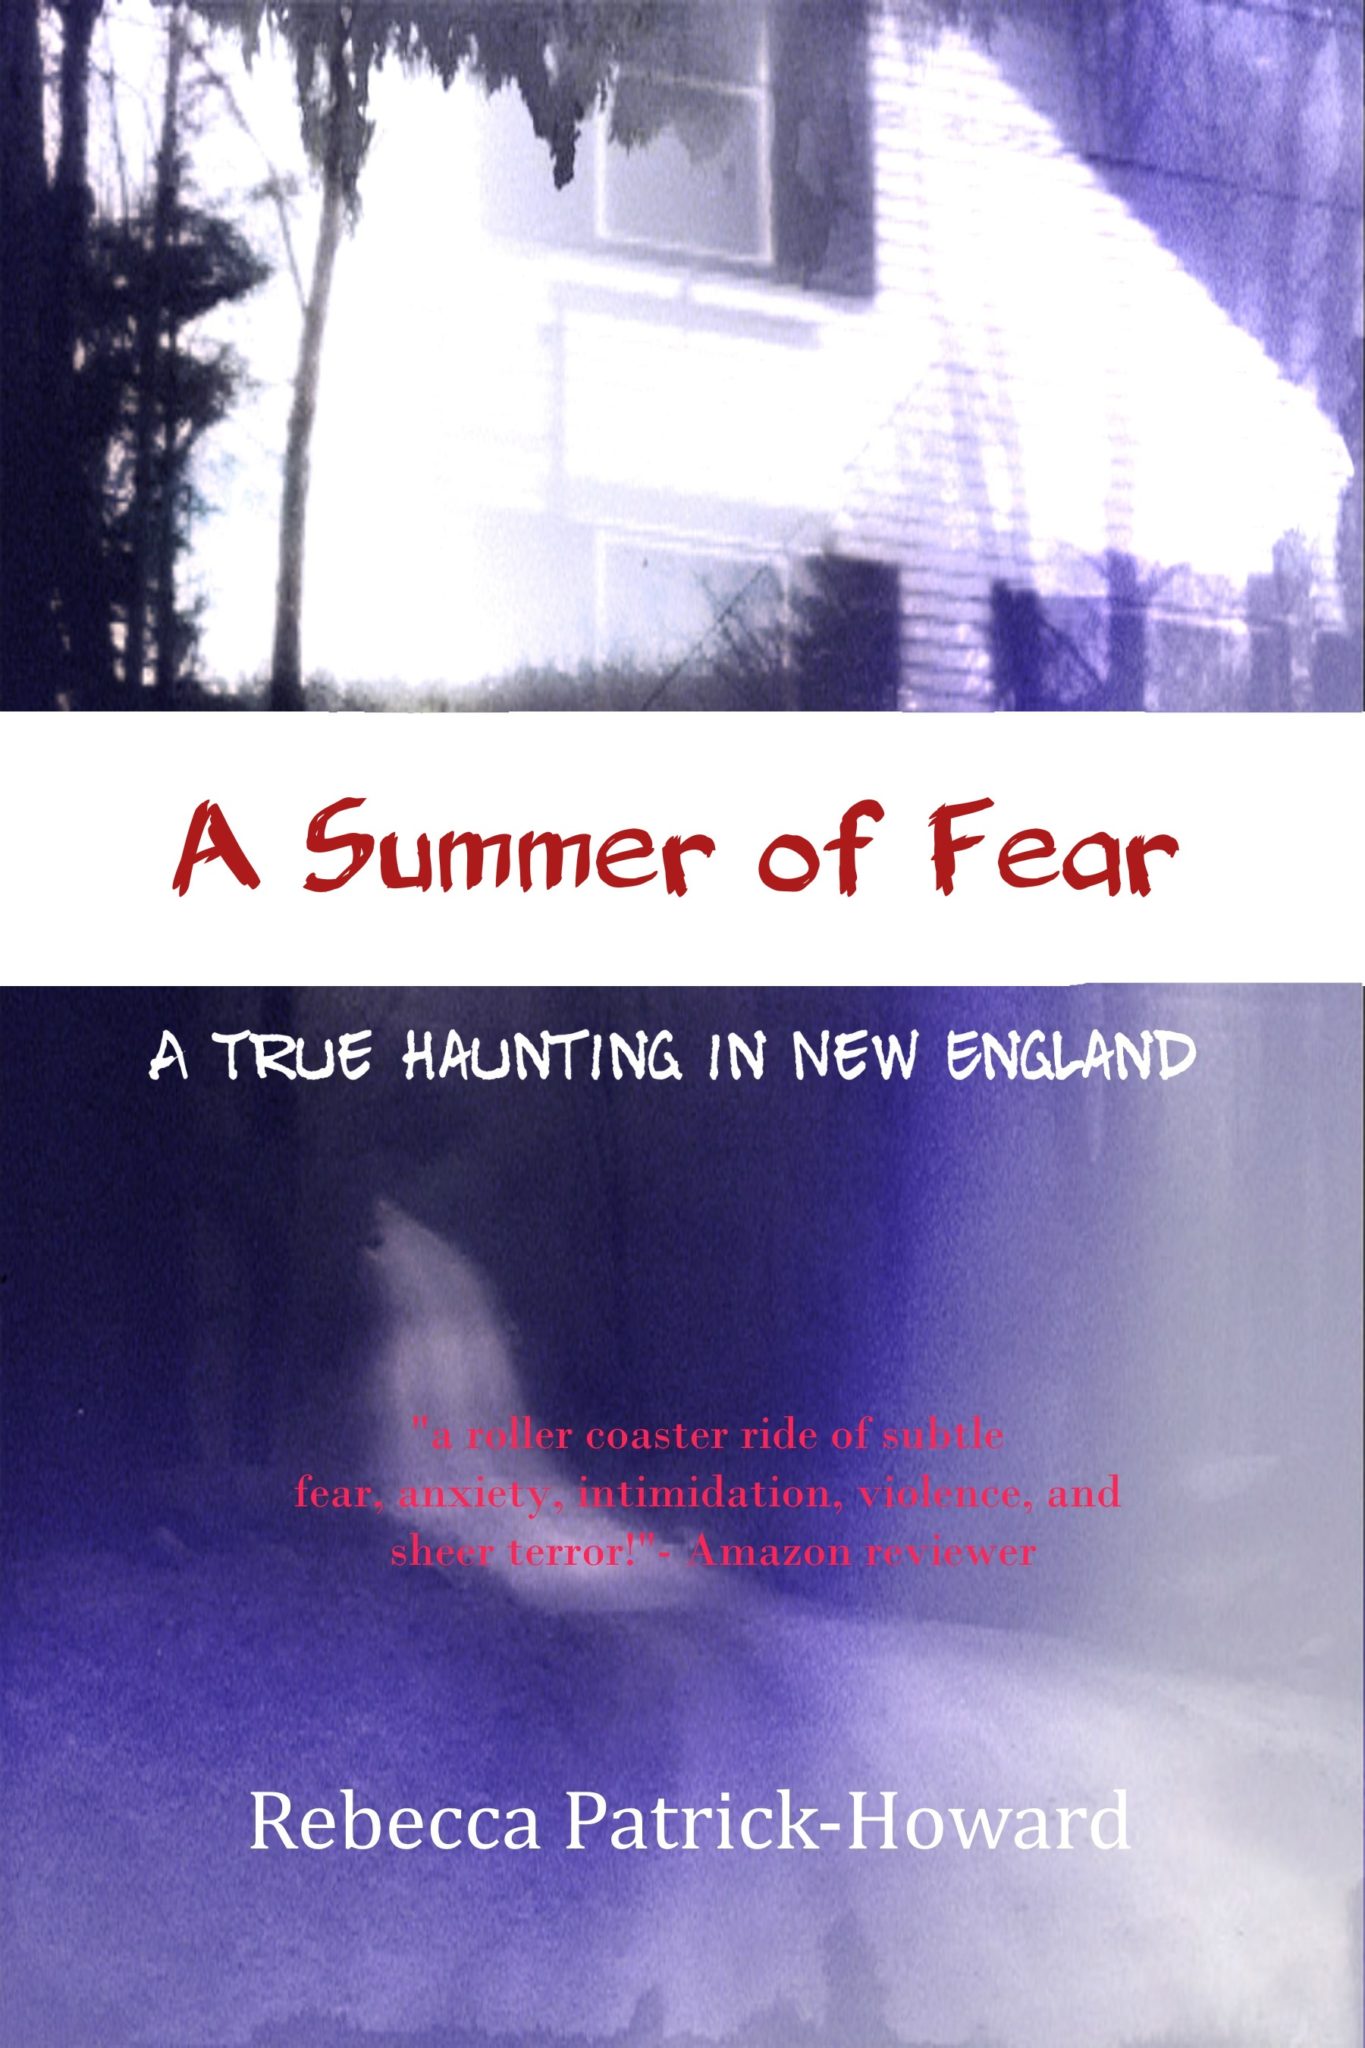 A Summer of Fear: A True Haunting in New England by Rebecca Patrick-Howard